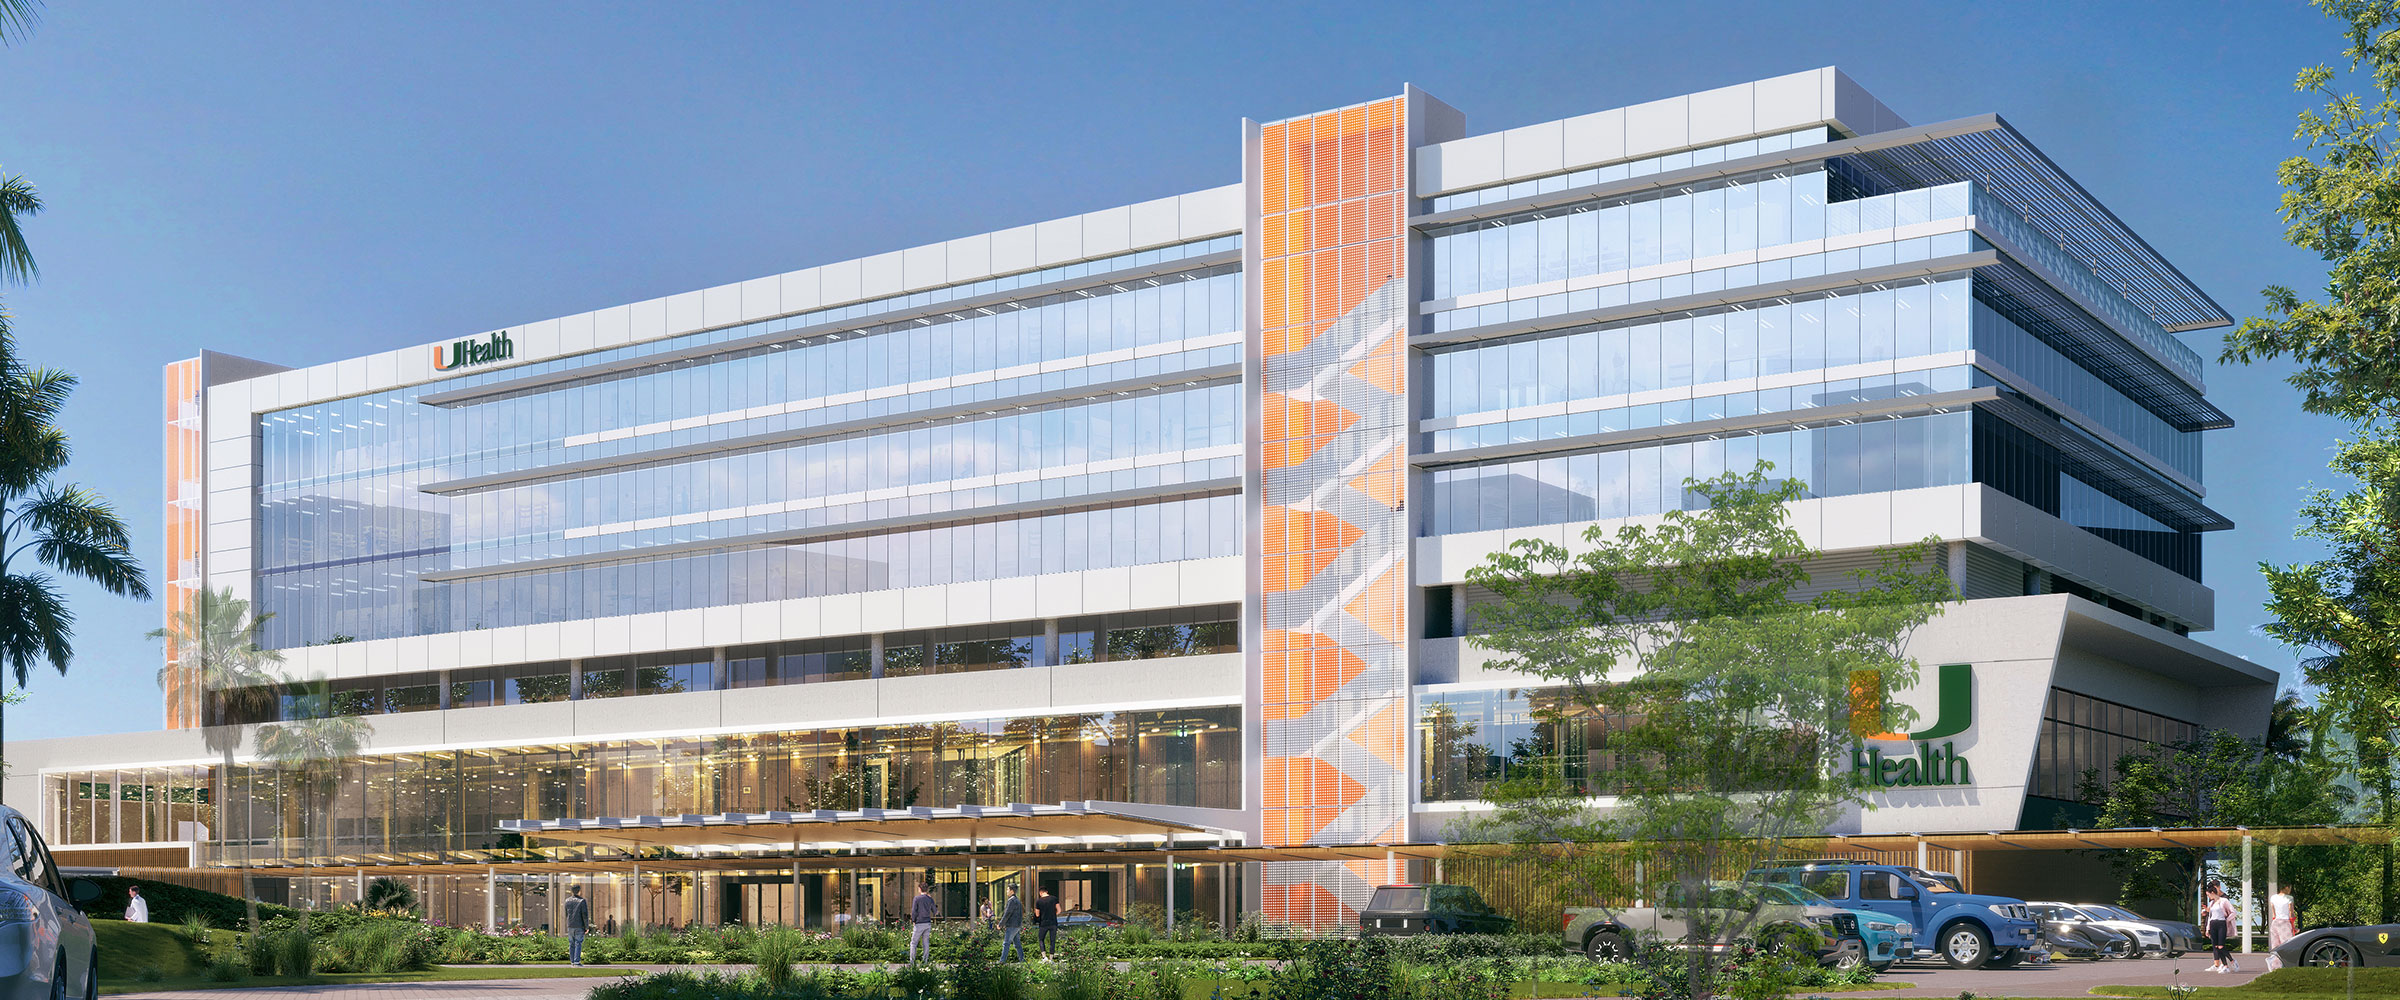 Main Day Architectural Rendering of UHealth at SoLé Mia in Aventura